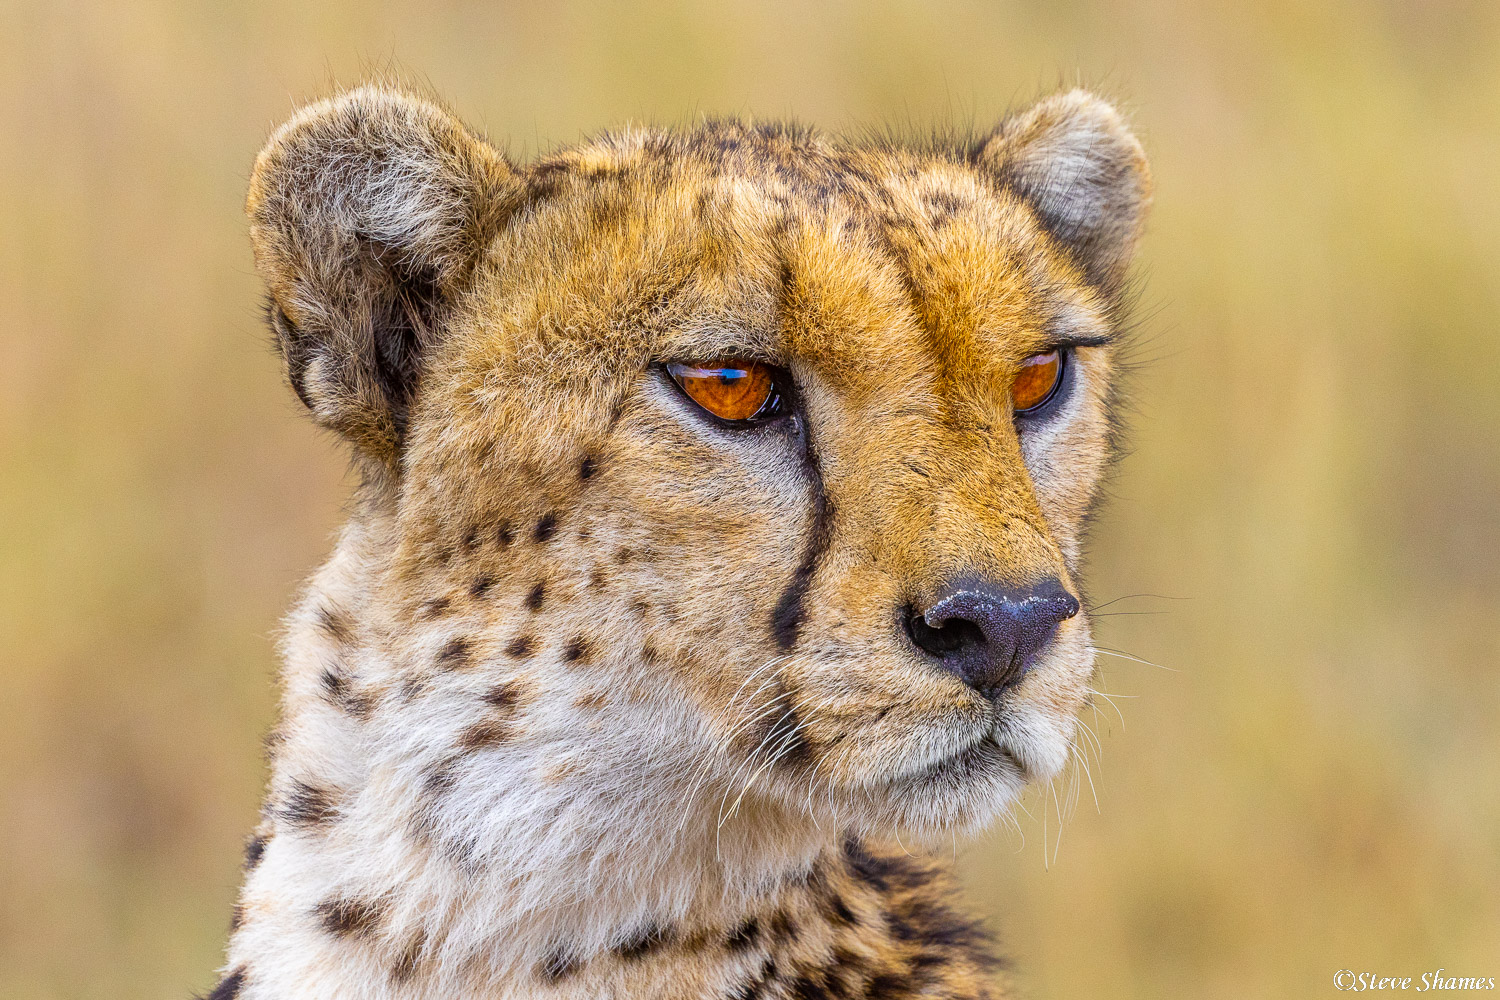 The big orange eyes of a cheetah on the lookout.